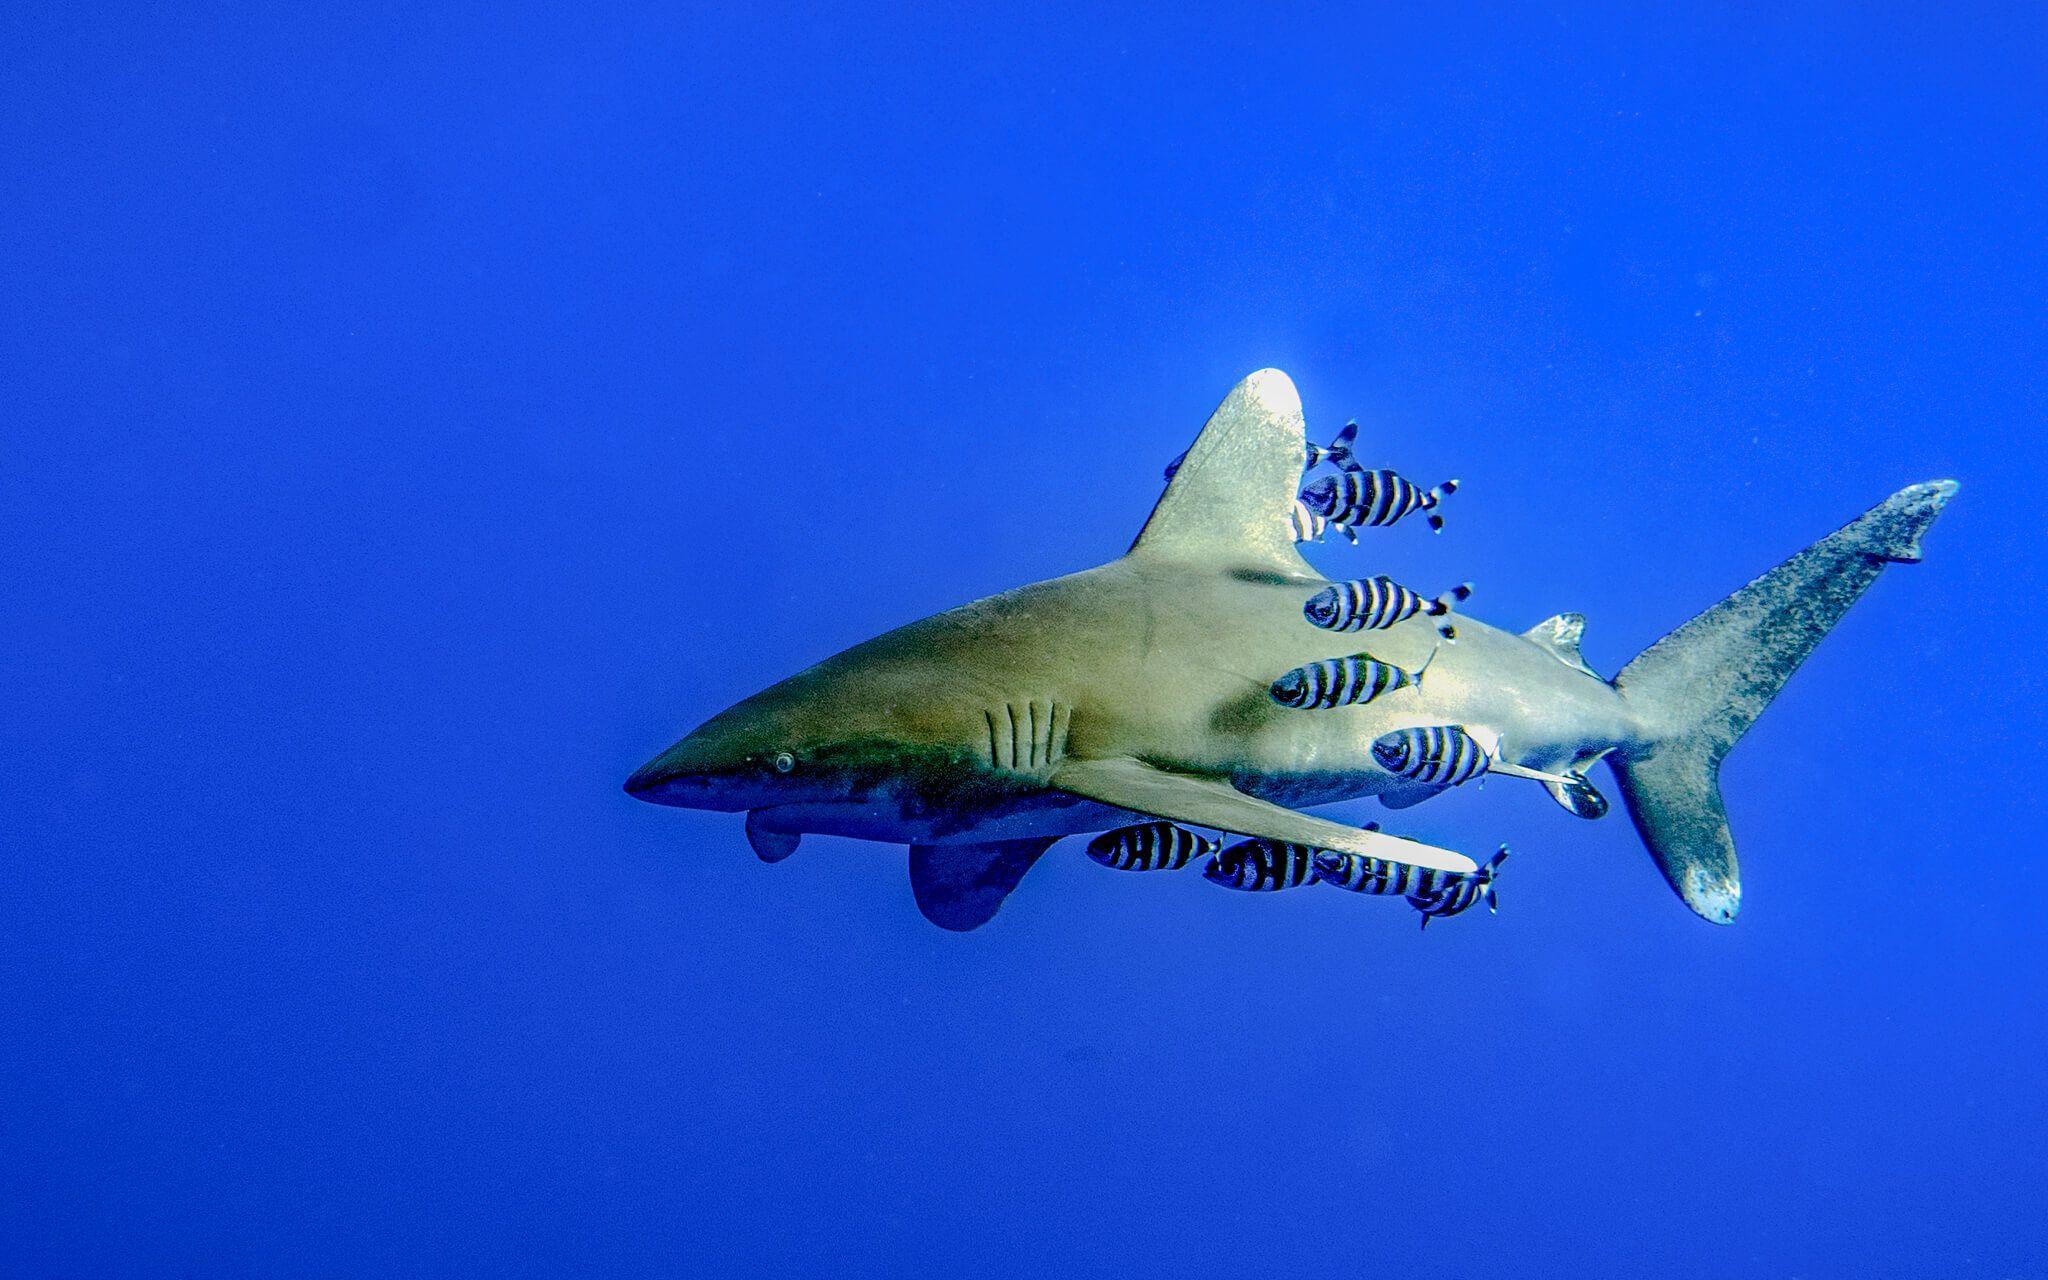 An Oceanic White Tip shark prowls the waters of the Red Sea accompanied by their usual Remora and Pilotfish.
Photo: Omar Dessouky